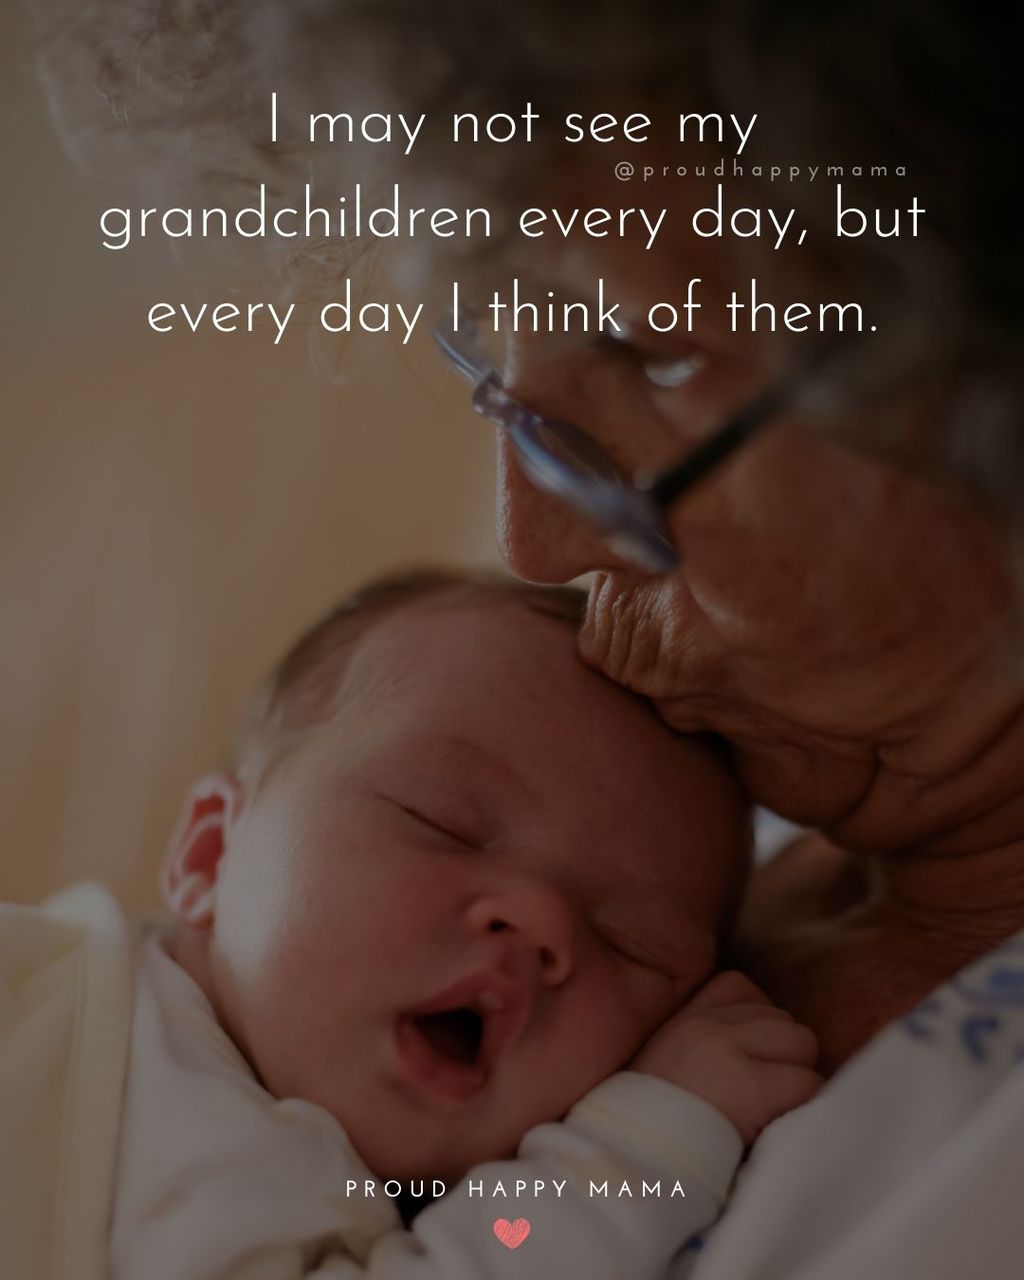 Quotes for Grandchildren - I may not see my grandchildren every day, but every day I think of them.